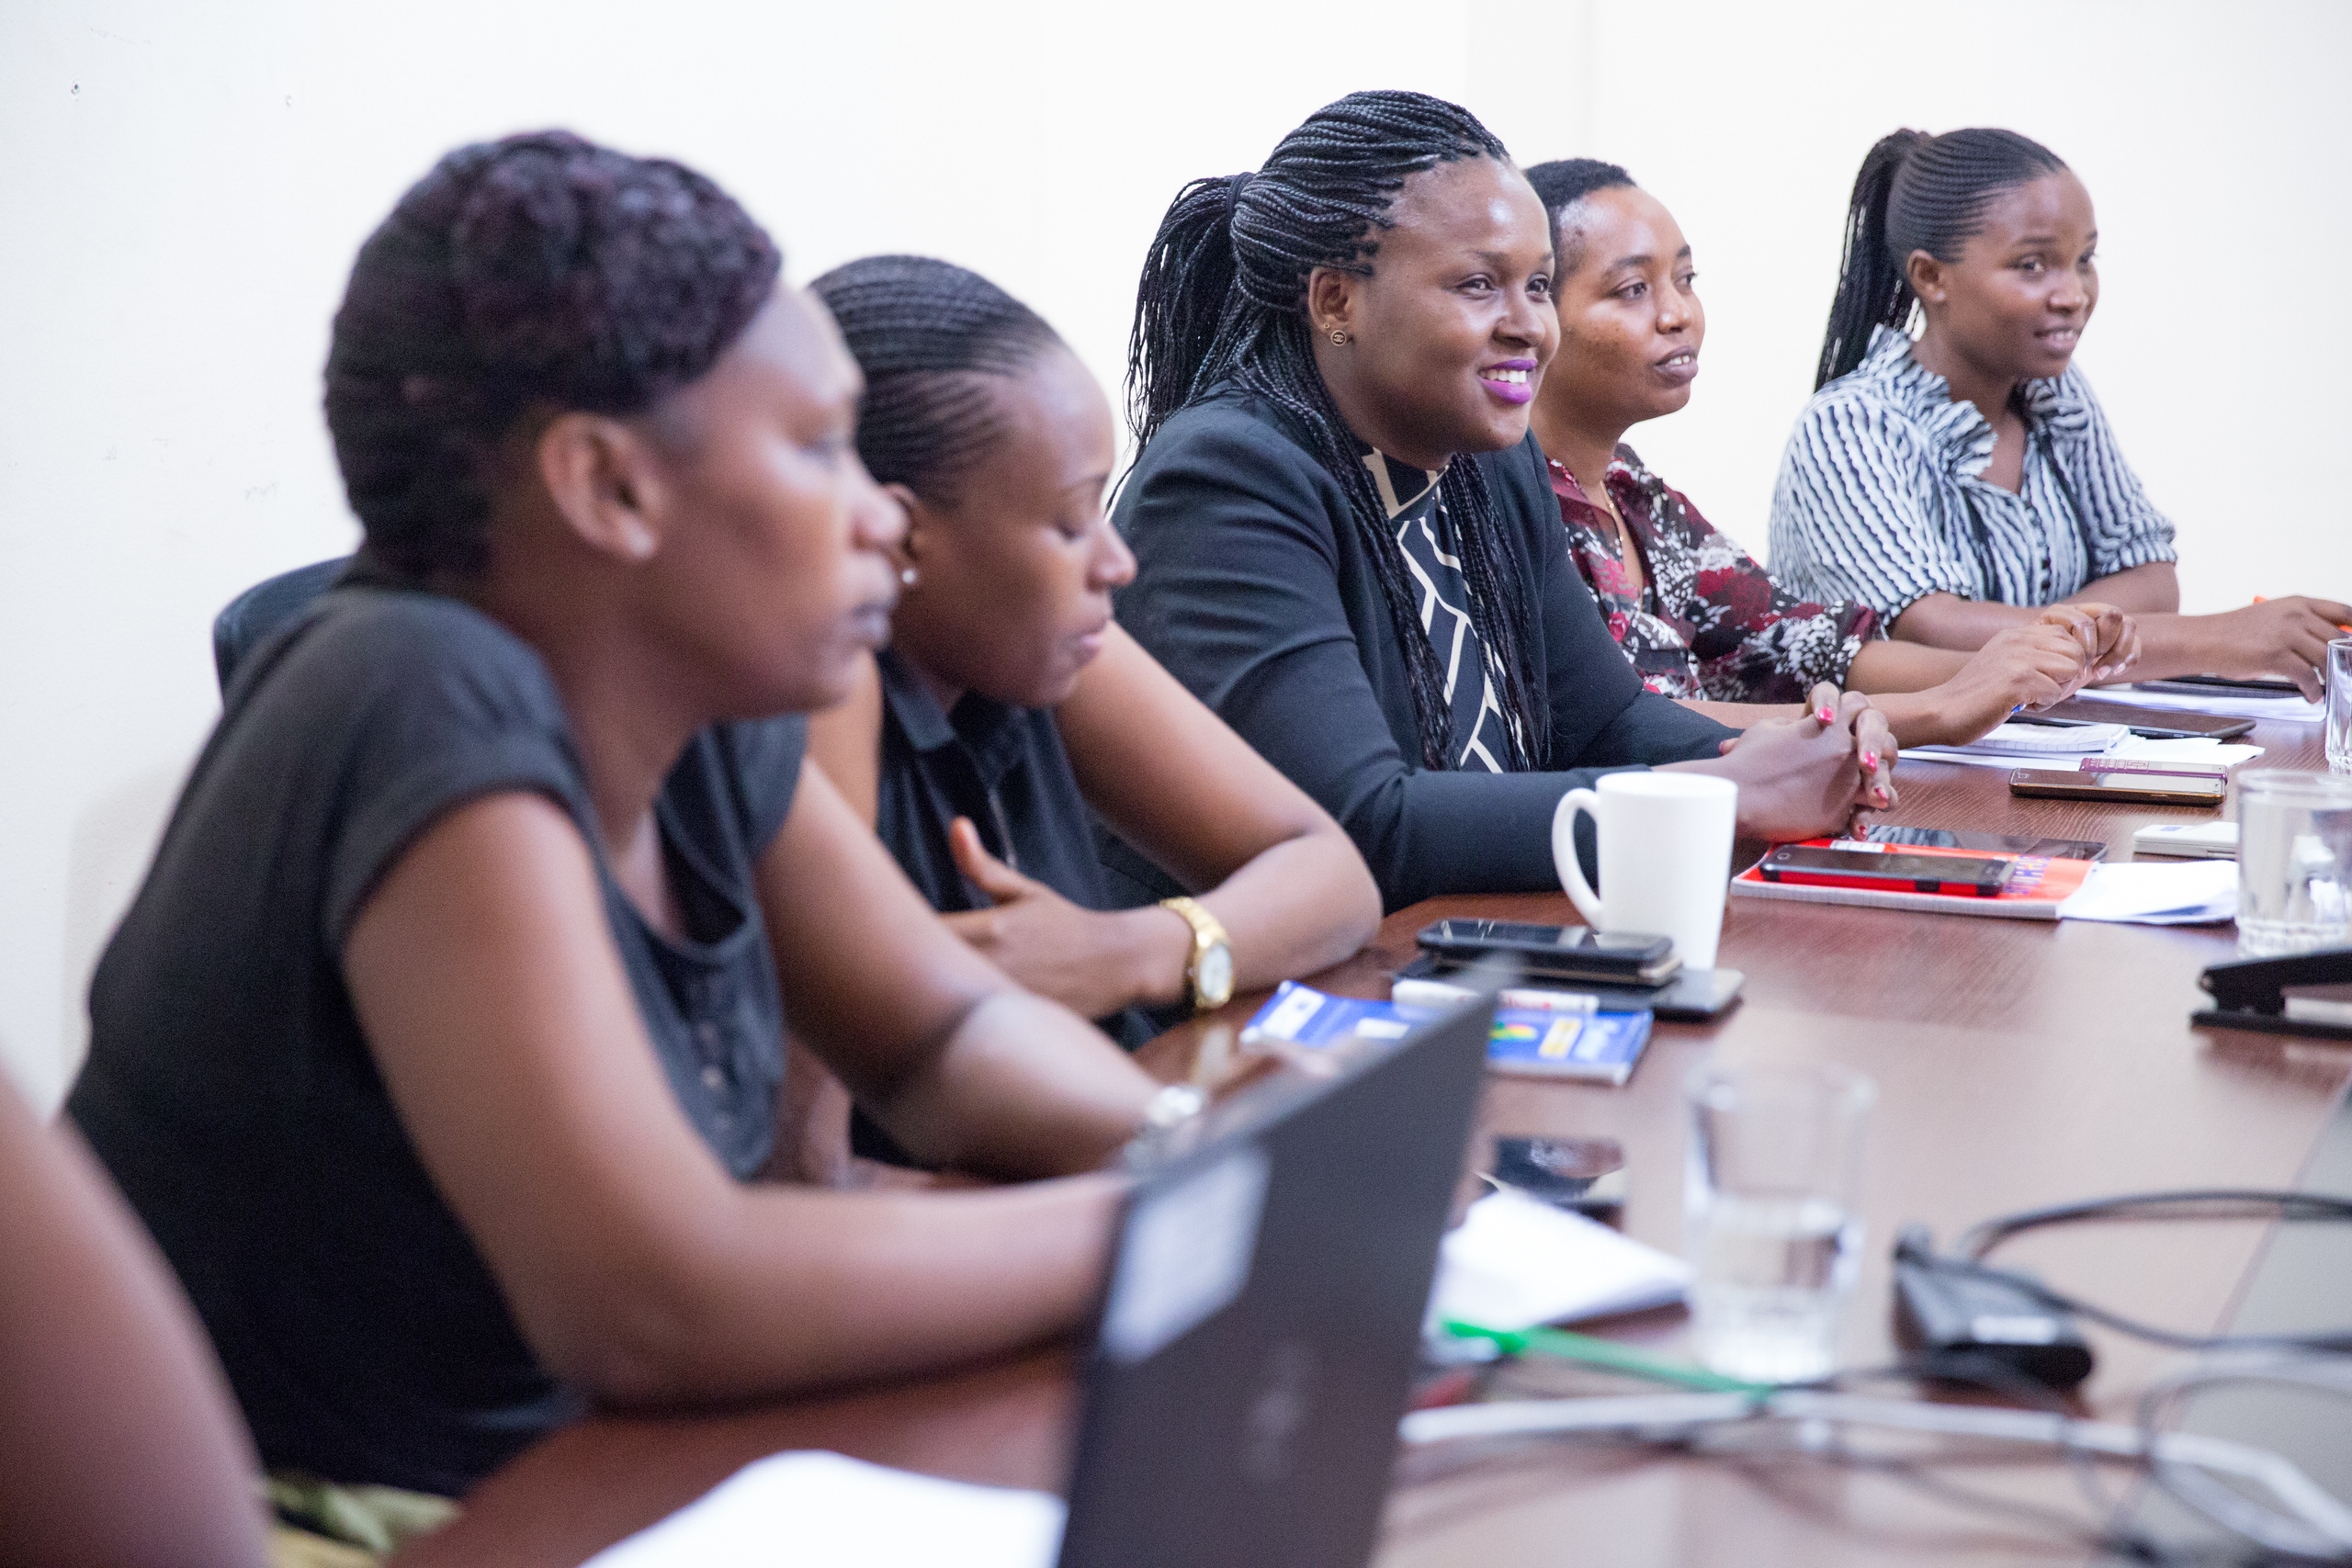 Ritha Mboneko participates in a meeting with her Tanzanian and UCSF colleagues. She is shown smiling and listening at a conference table.